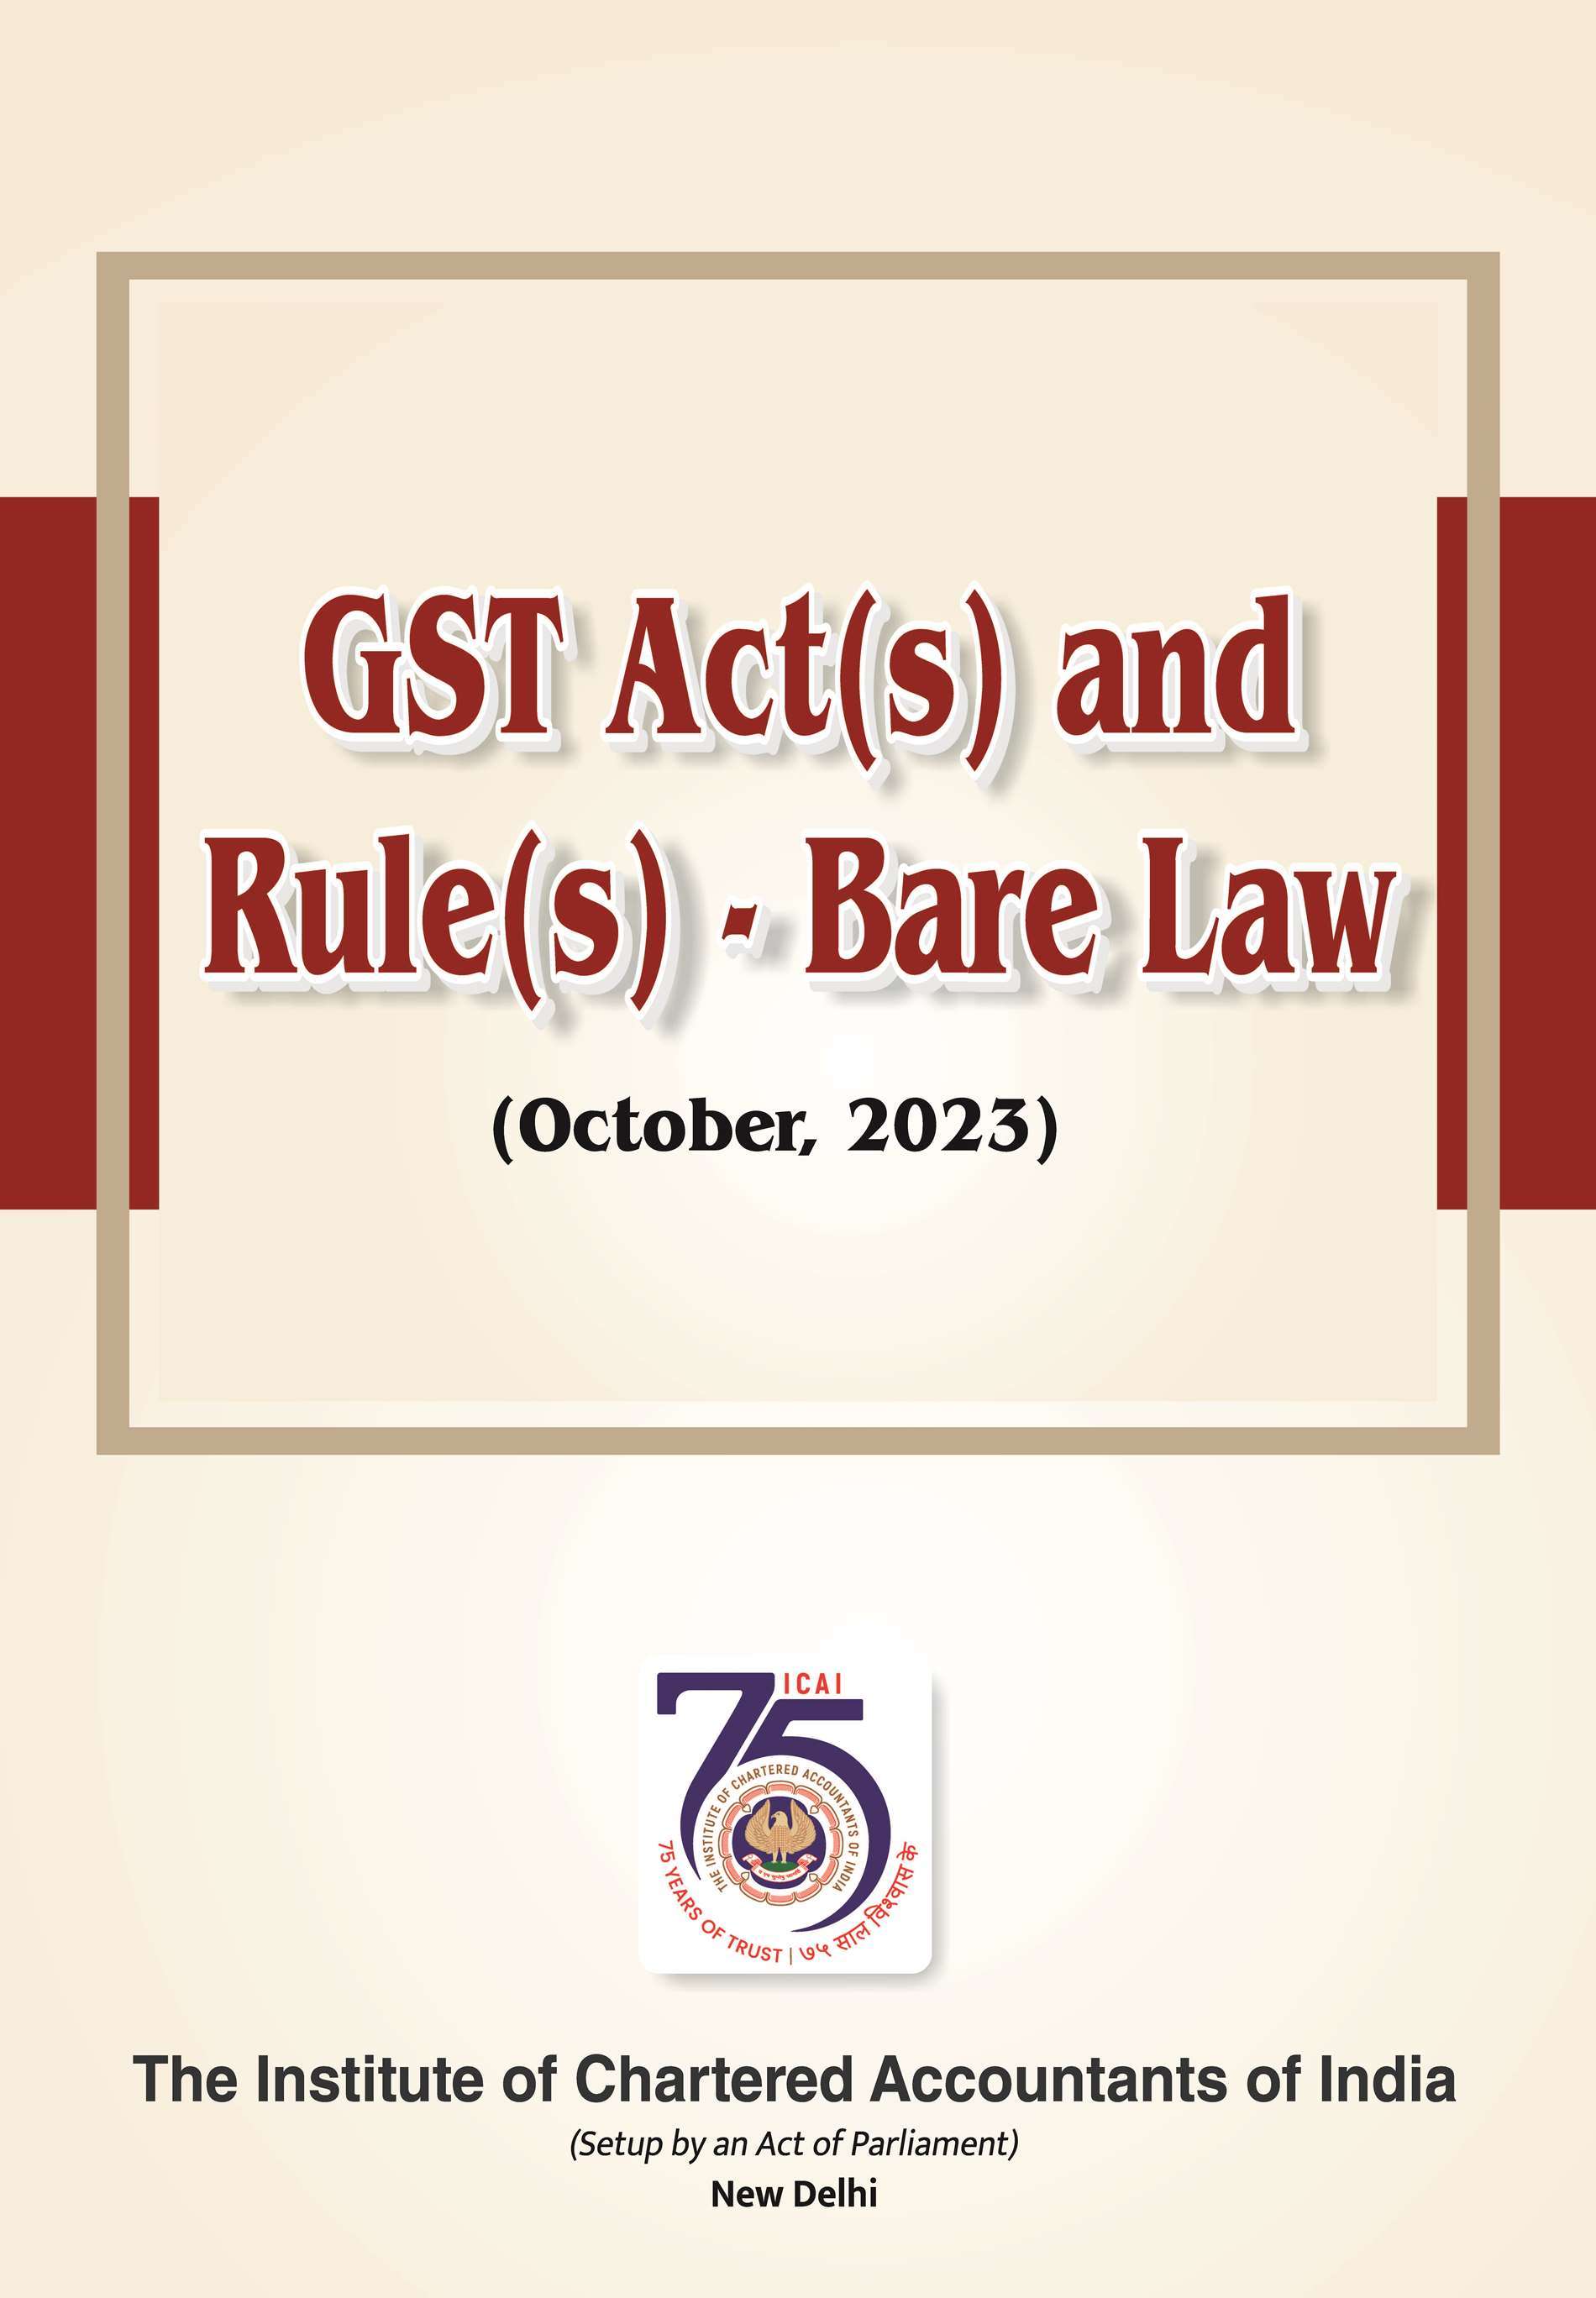 GST Act(s) and Rule(s) - Bare Law - 6th Edition - October, 2023